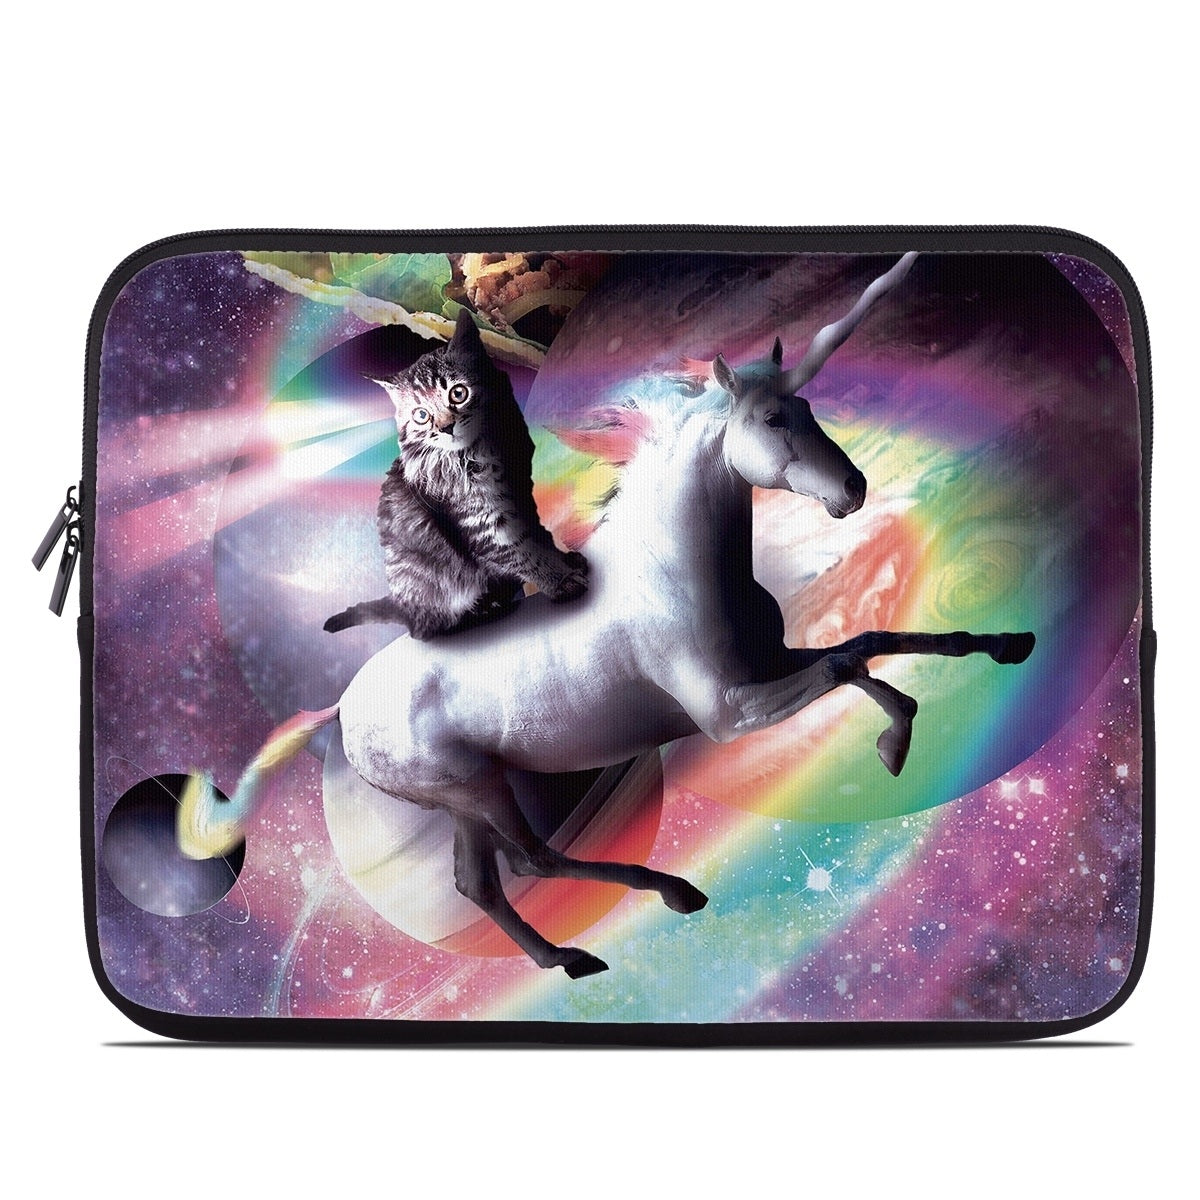 Defender of the Universe - Laptop Sleeve